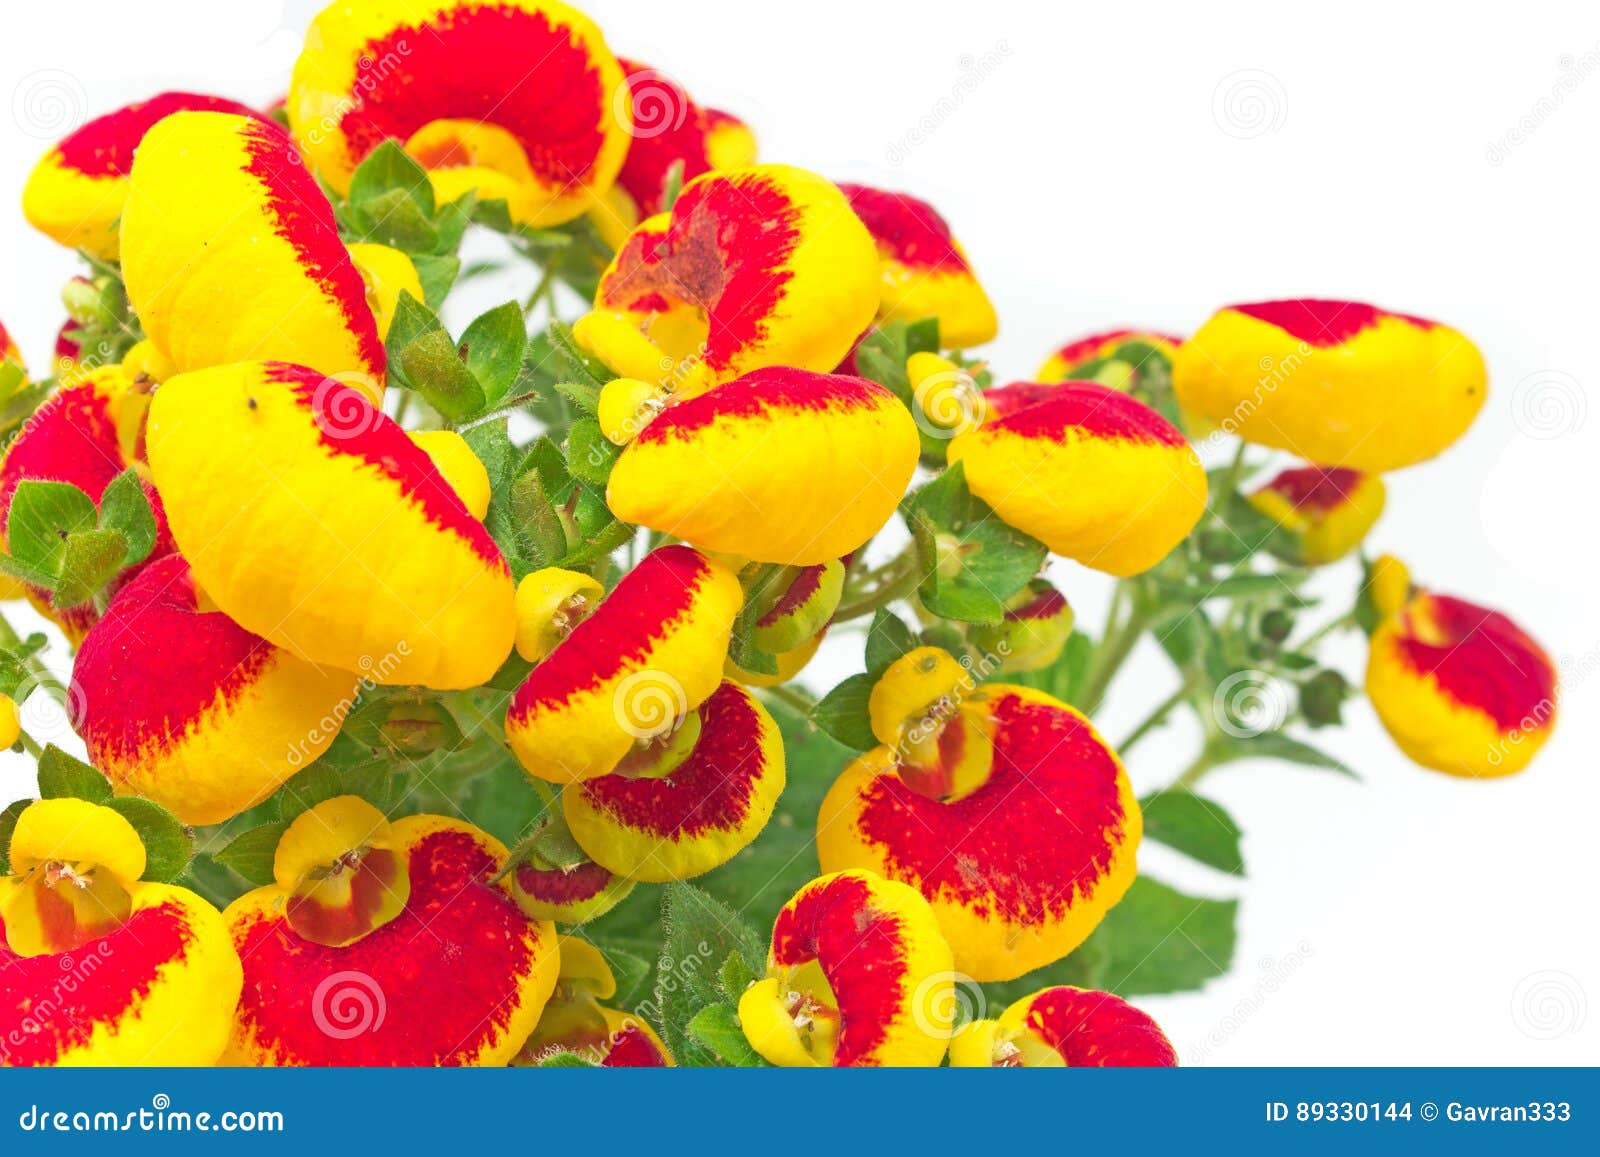 Calceolaria. (Ladies Purse) | Calceolaria, also called lady'… | Flickr